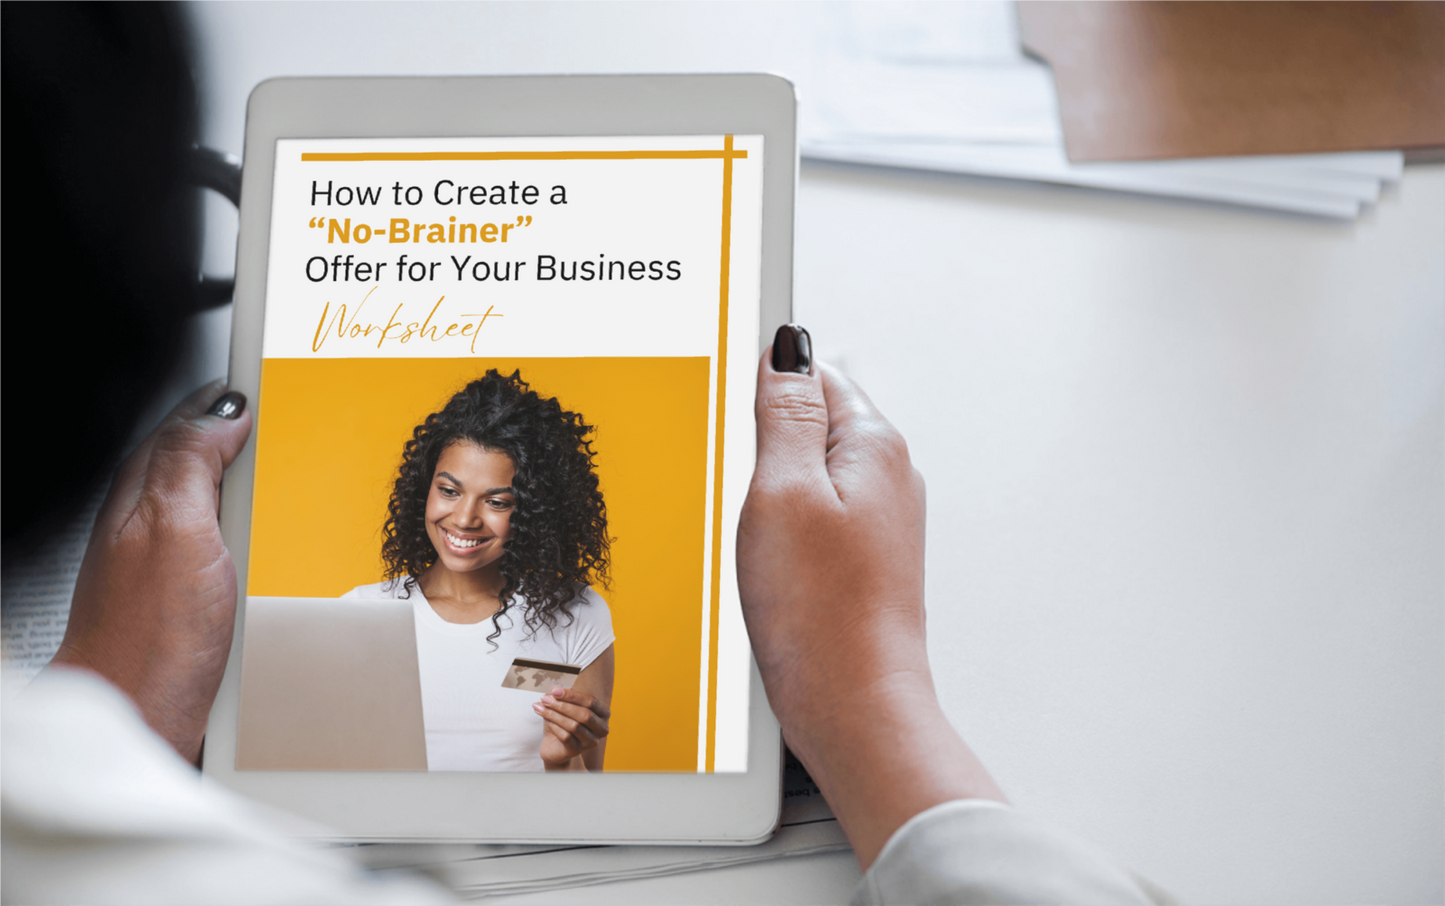 How to Create a “No-Brainer” Offer for Your Business - Worksheet